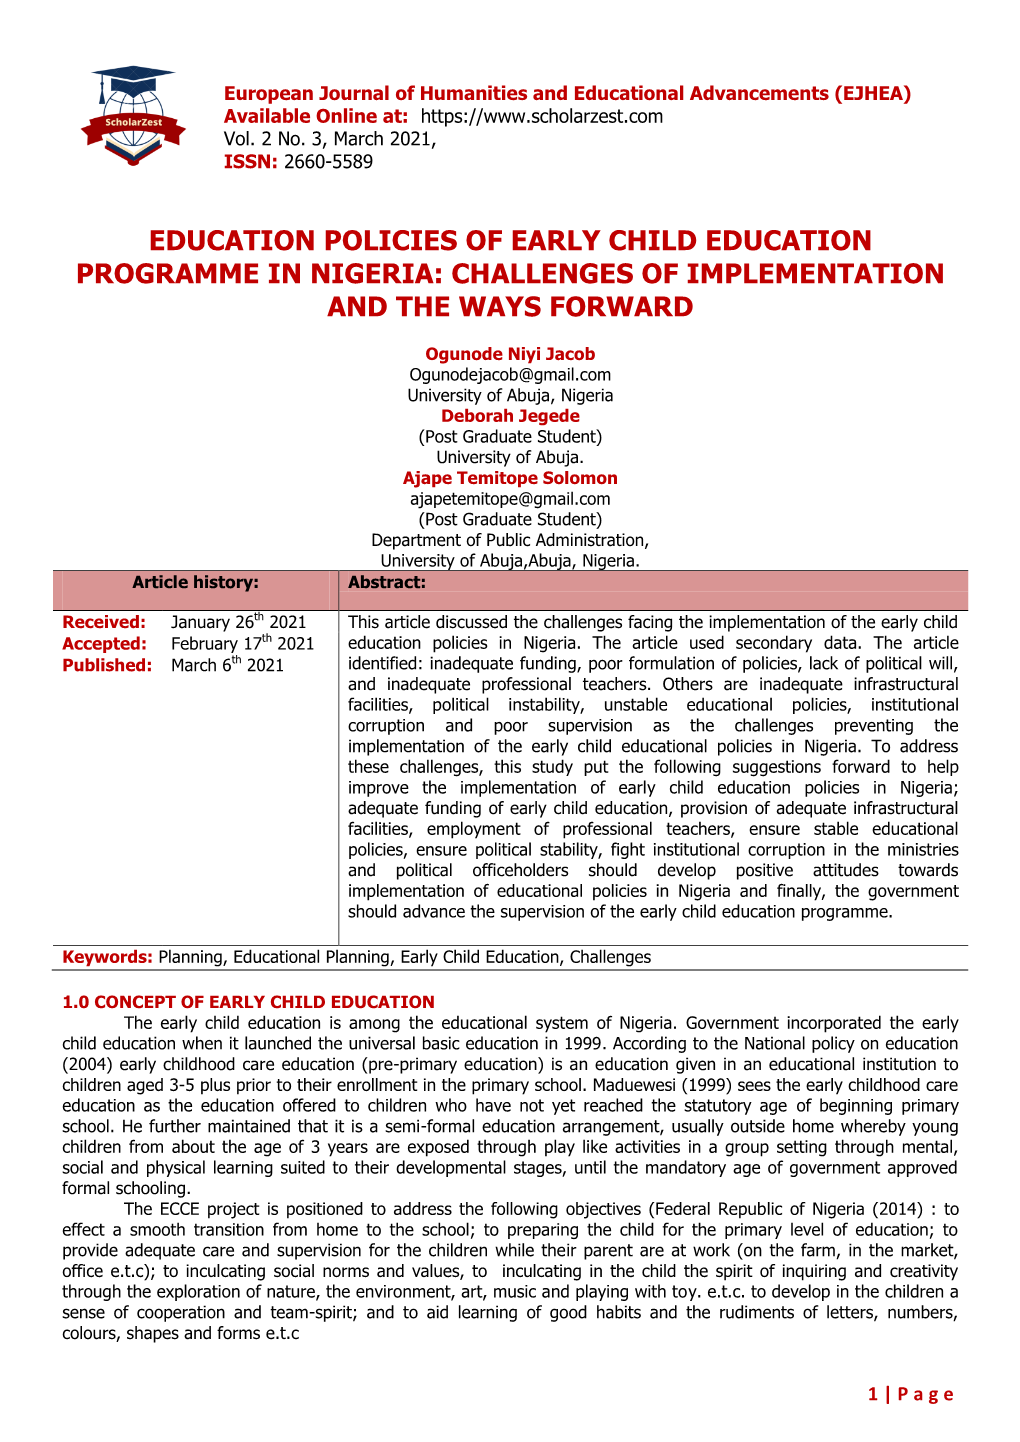 Education Policies of Early Child Education Programme in Nigeria: Challenges of Implementation and the Ways Forward